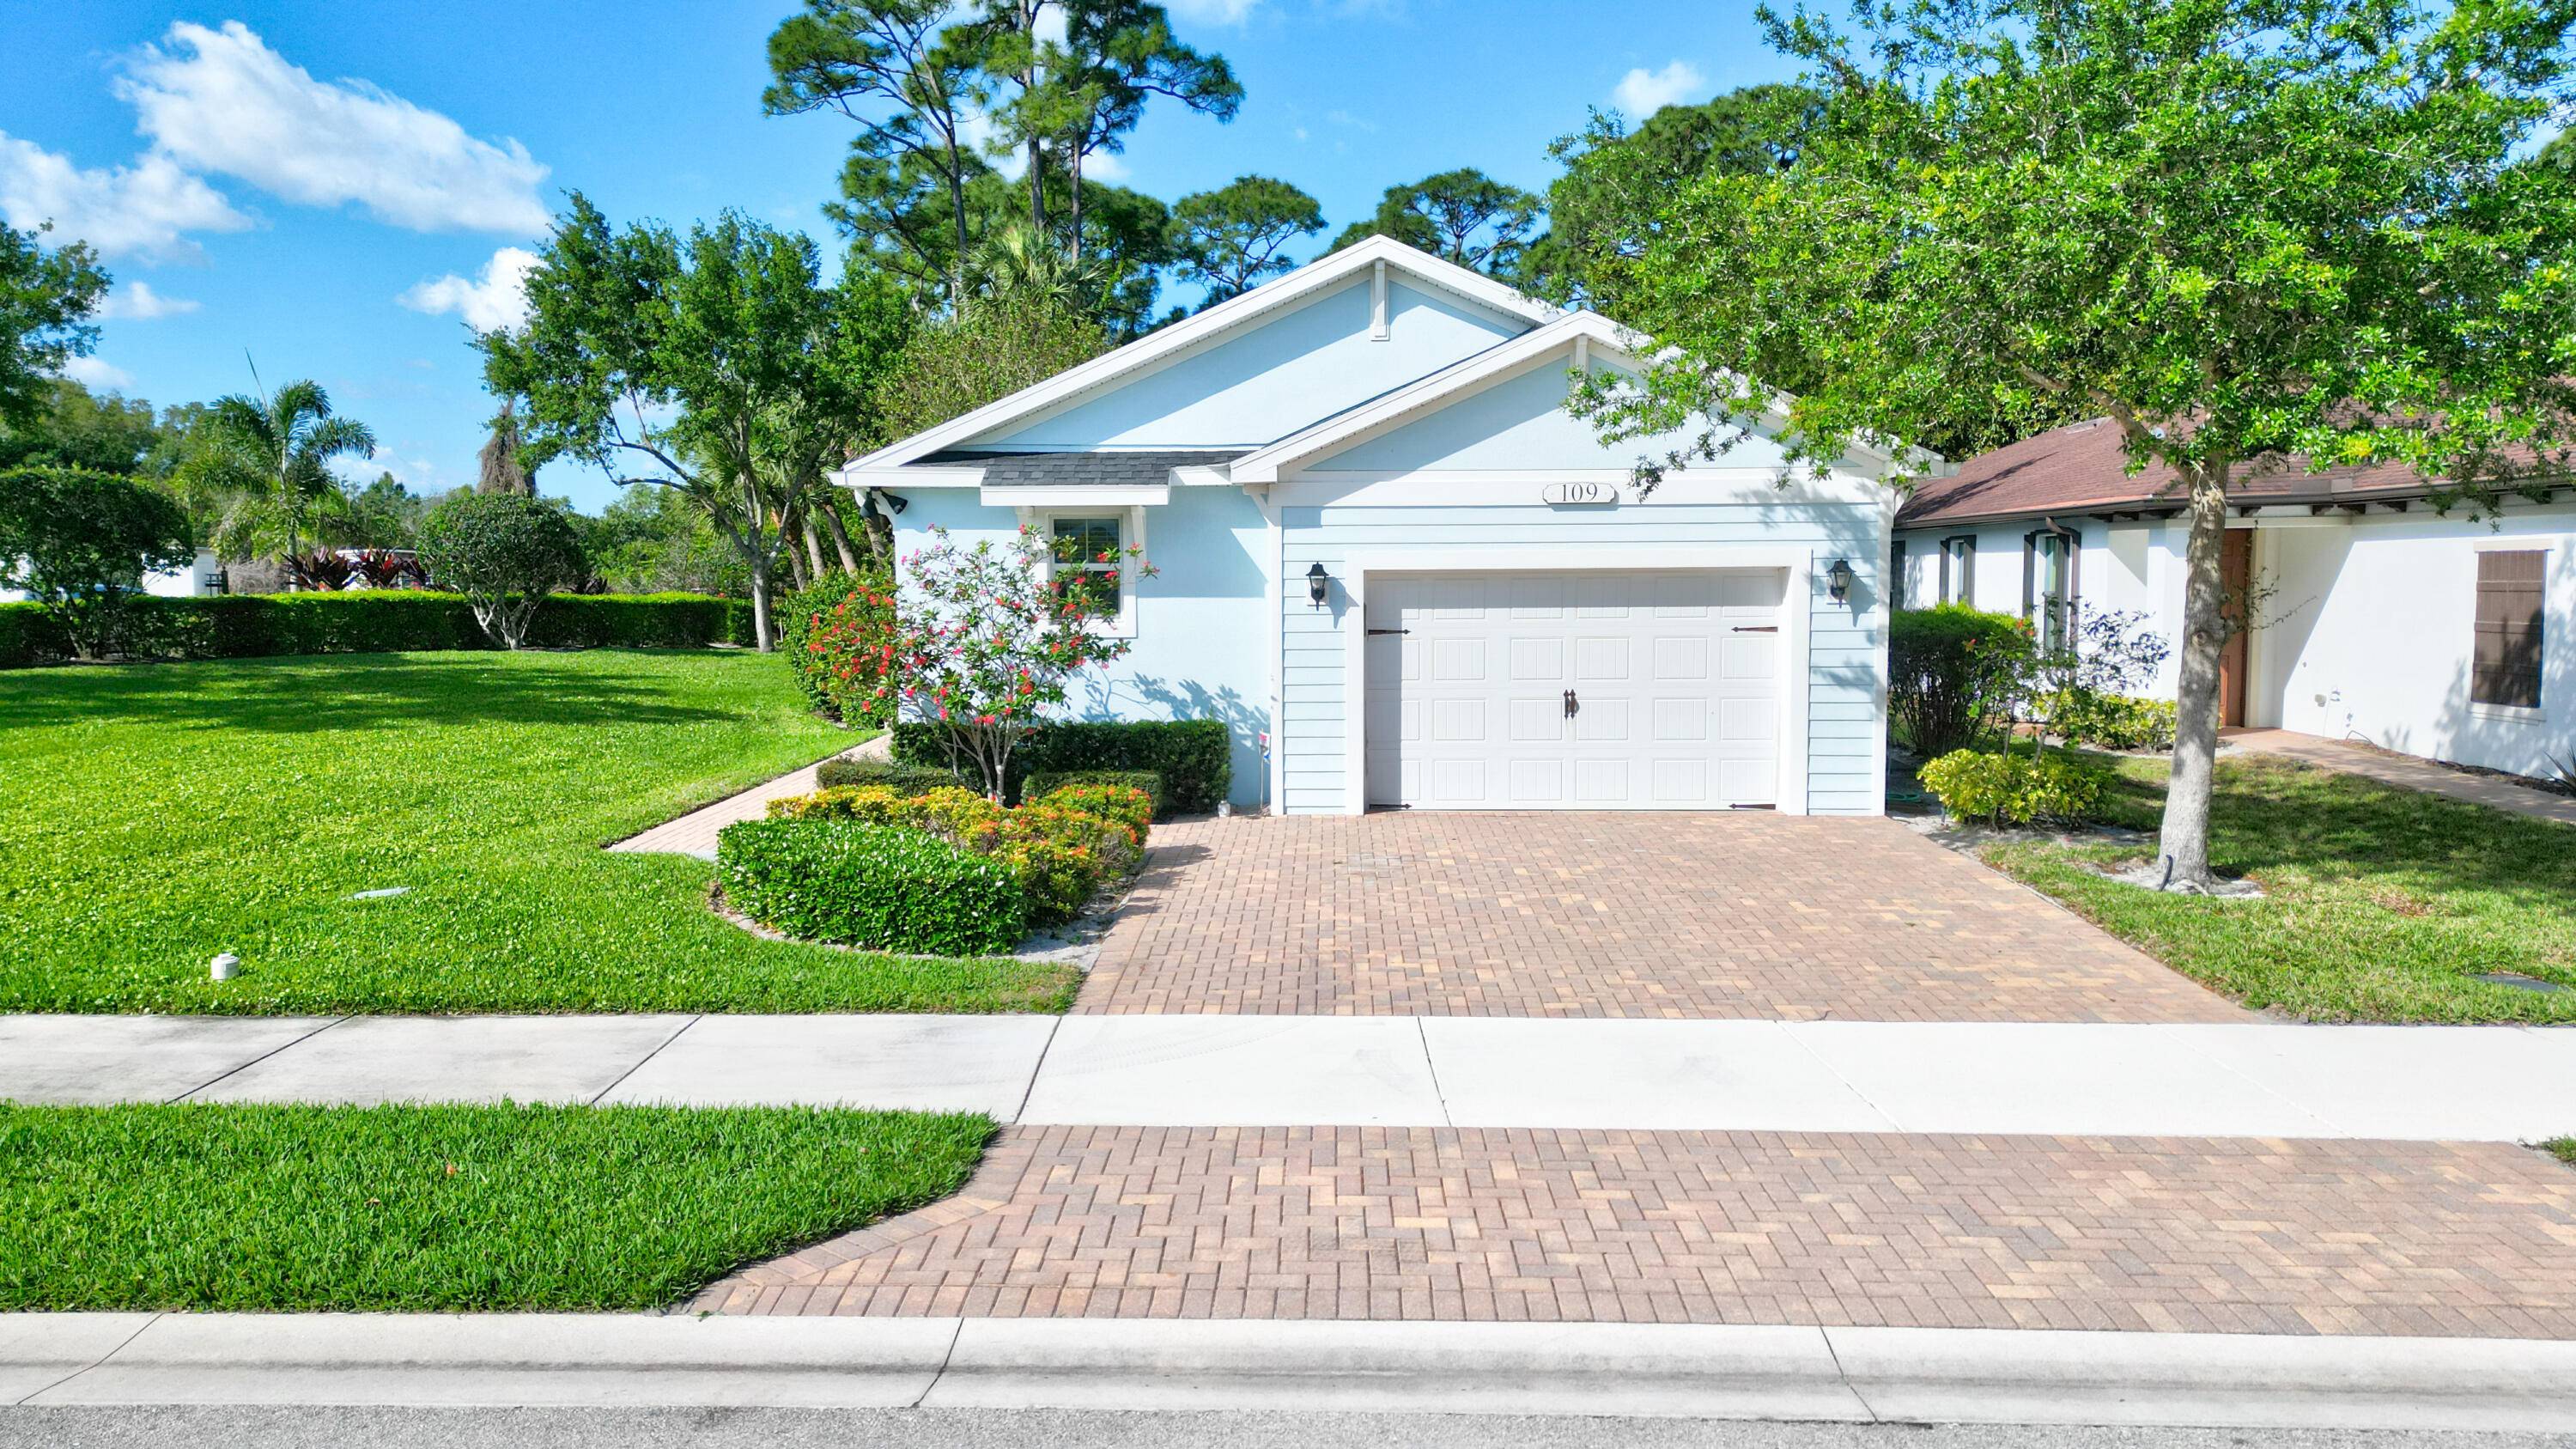 Beautiful home located in a desirable community named Visconti in Sandpiper Bay.